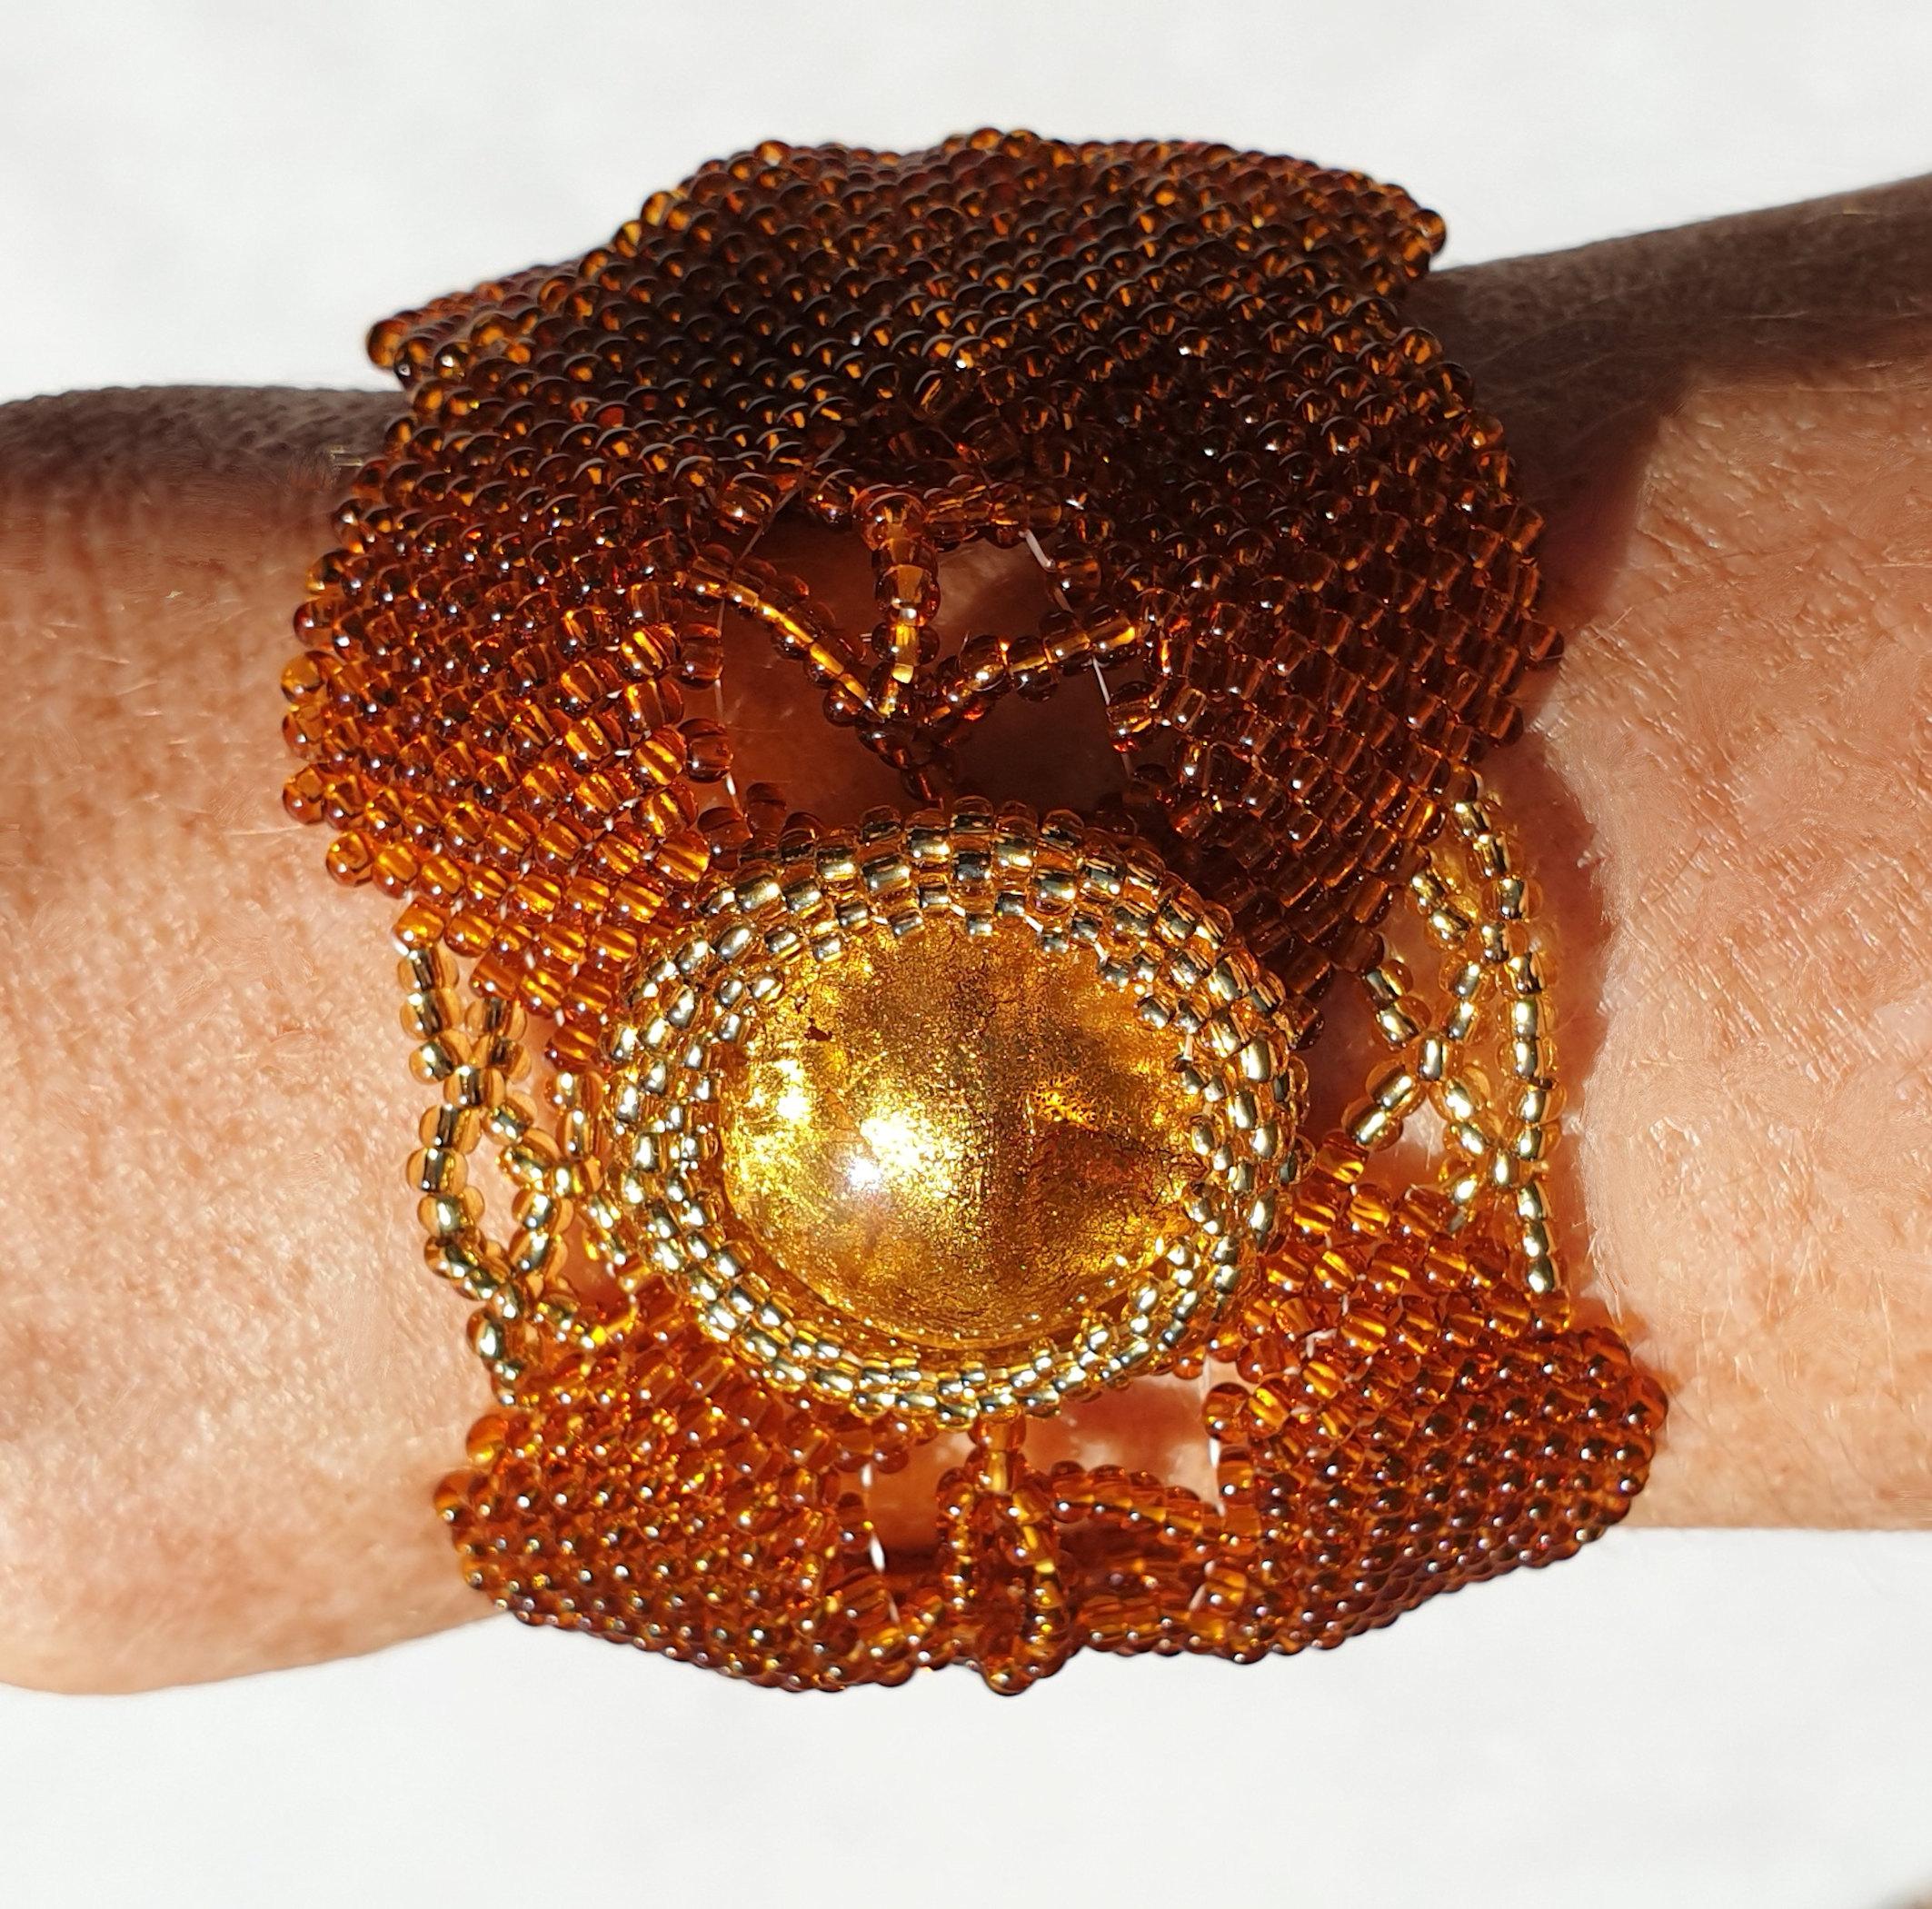 Amber and gold Murano glass beads costume bracelet.
Unique, hand made by artist Paola B. in Venise, Italy, 2010s.
The artist is a member of Venezia Vetro Acqua e Terra, and AMA: Associazione Maestri Artigiani del Vetro.
Made of: Murano glass beads,